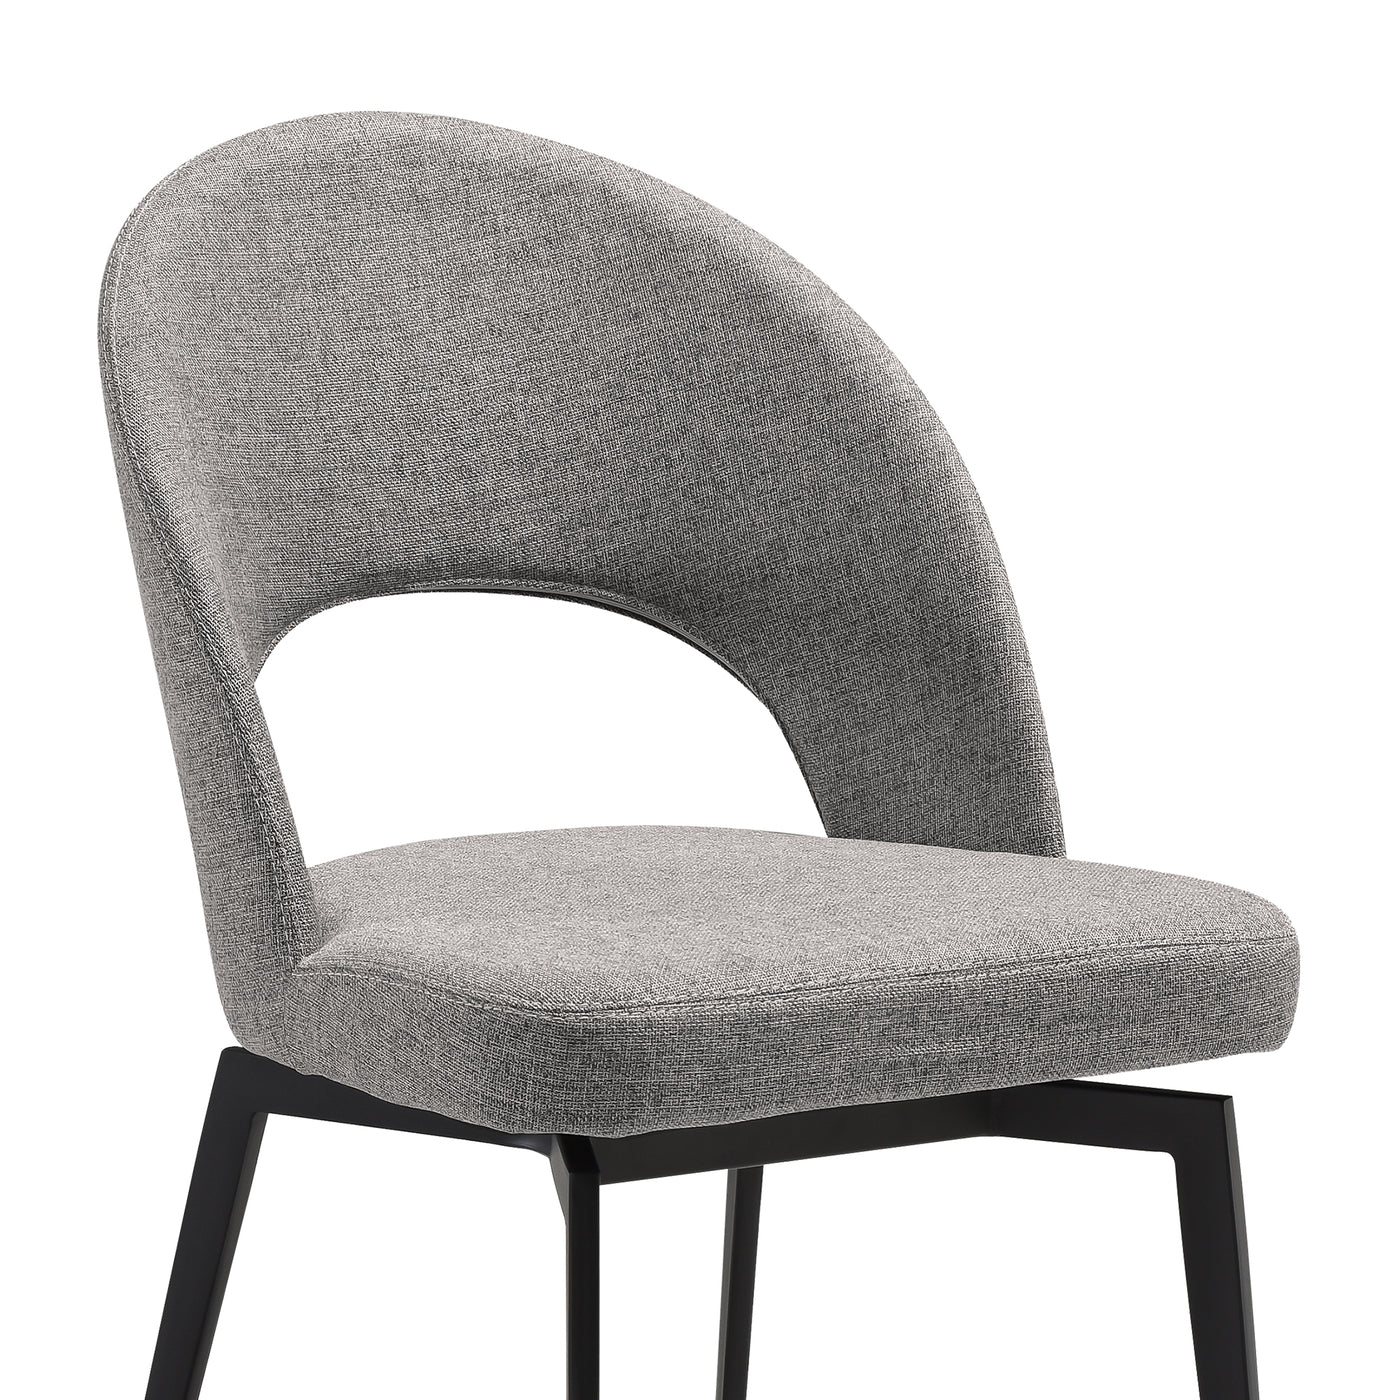 Lucia Swivel Upholstered Dining Chair Set of 2